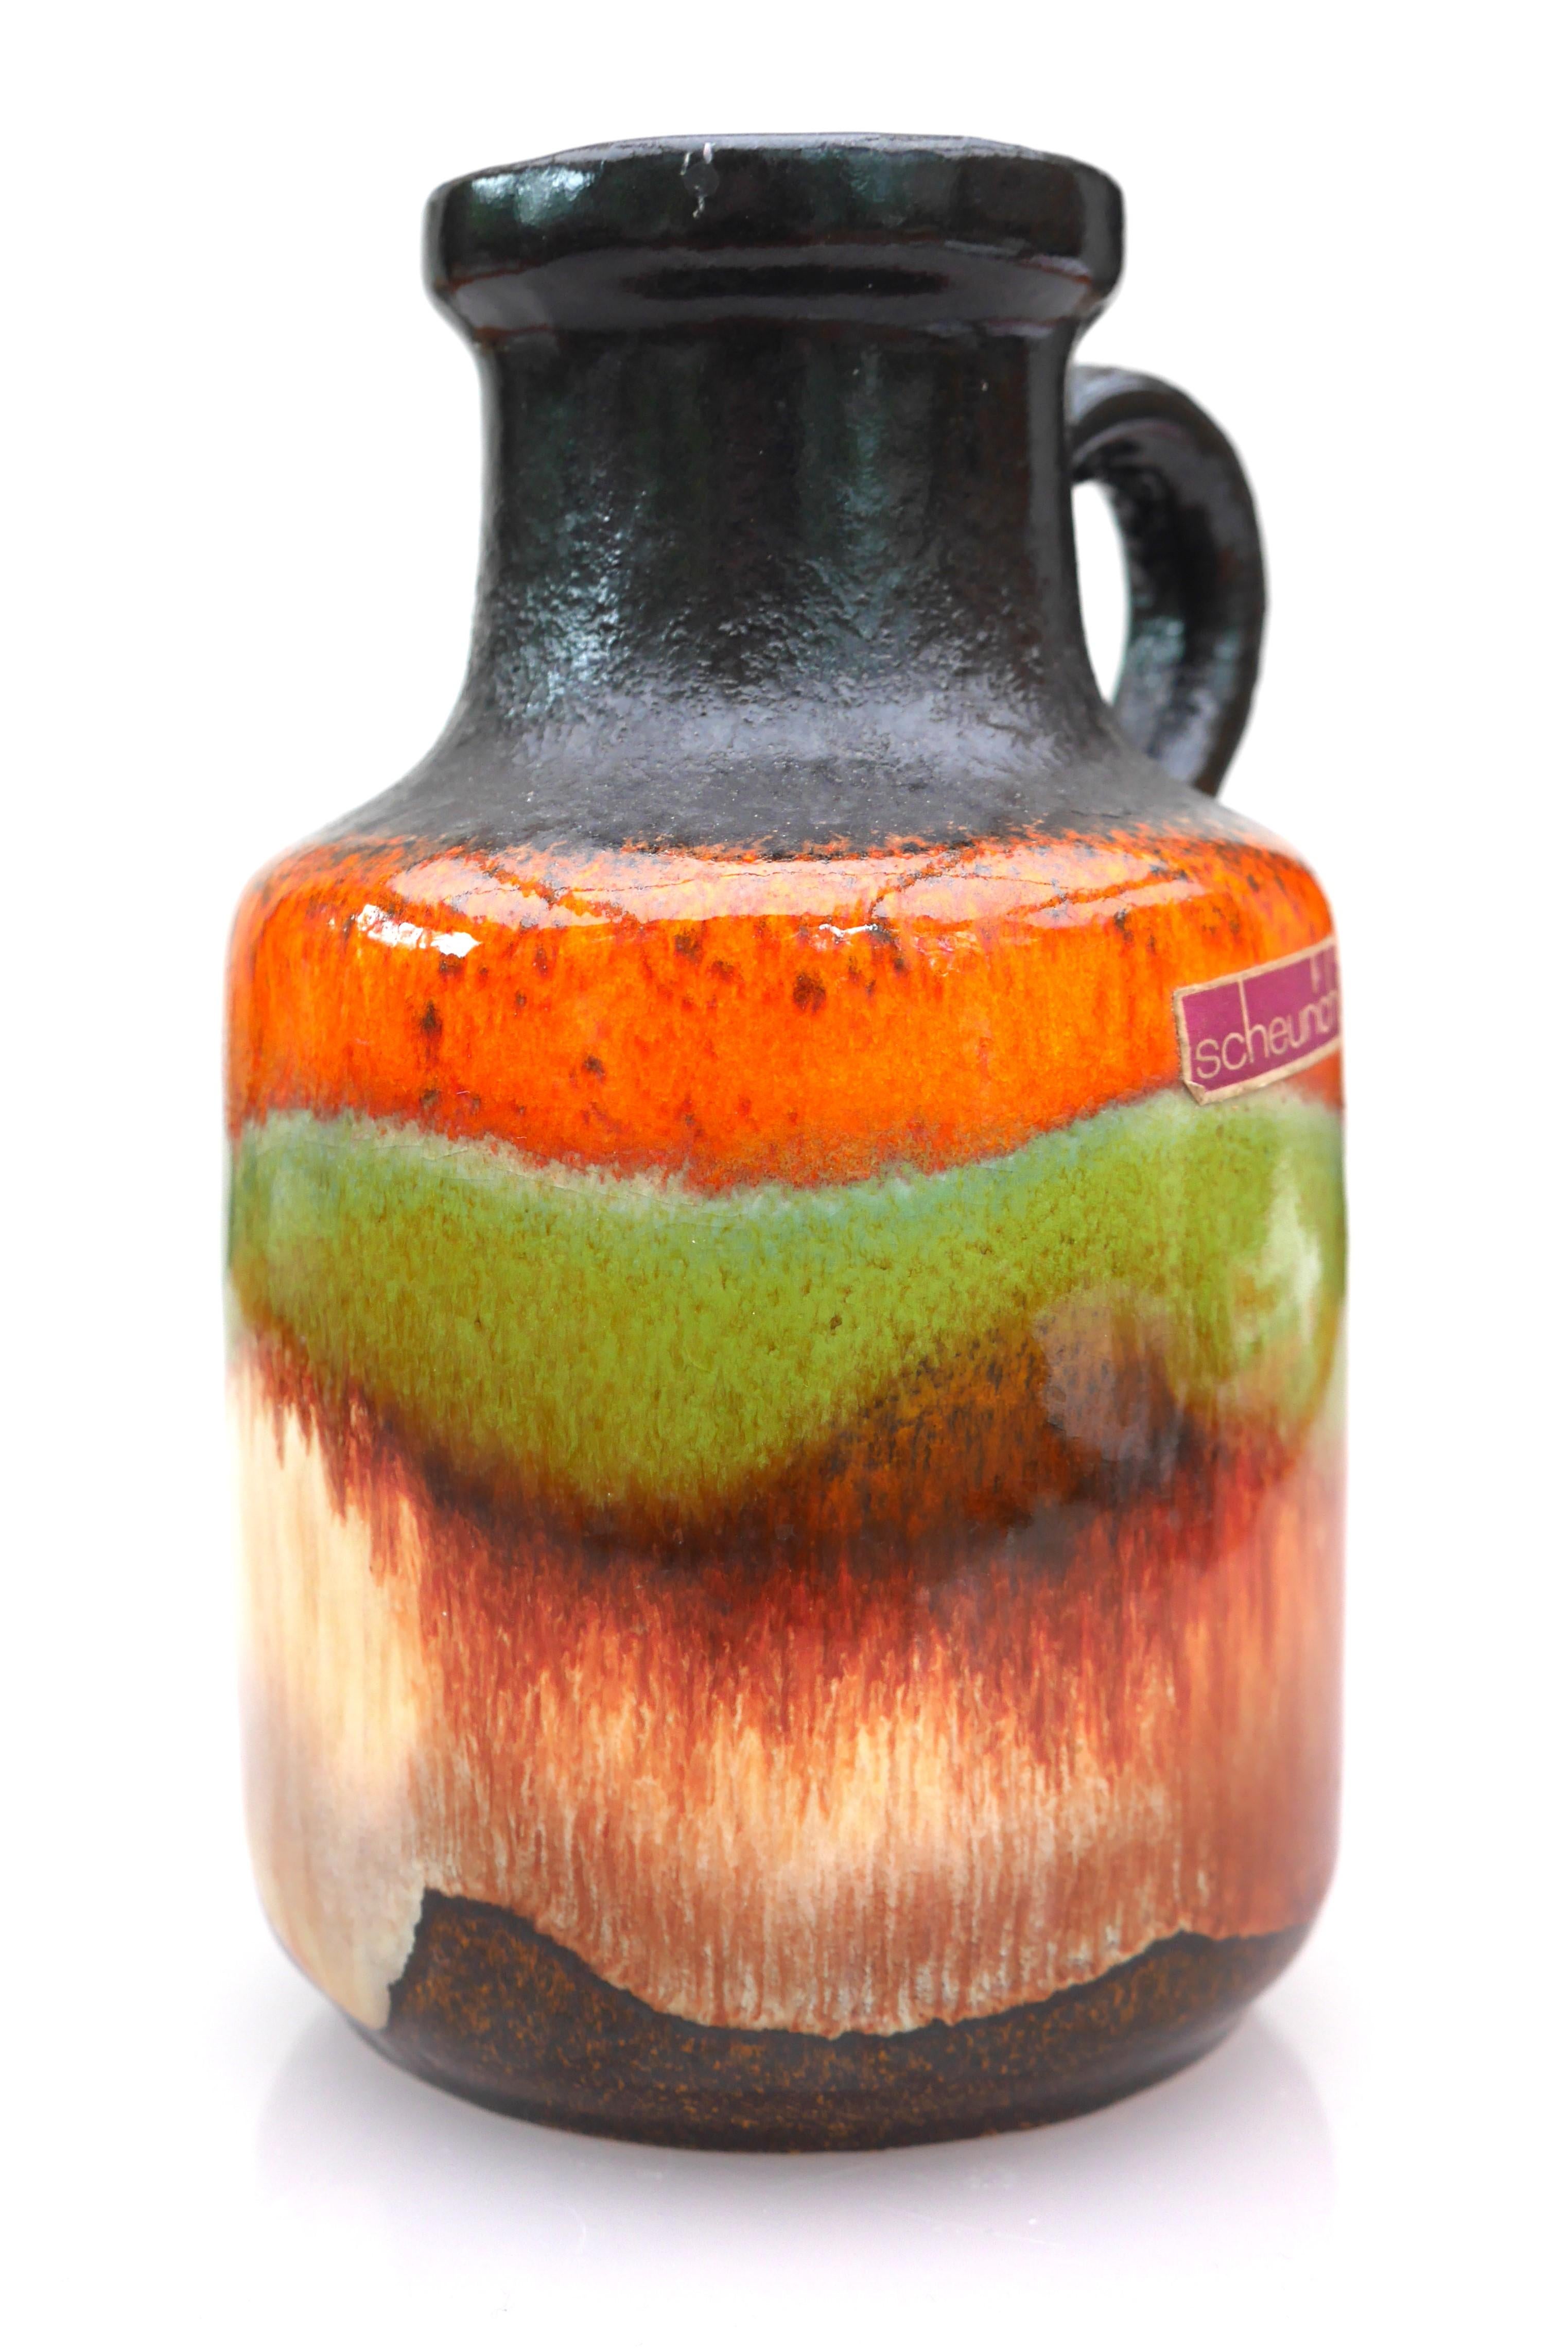 Ceramic Mid-century modern pottery vase by Scheurich, West Germany, 1970s